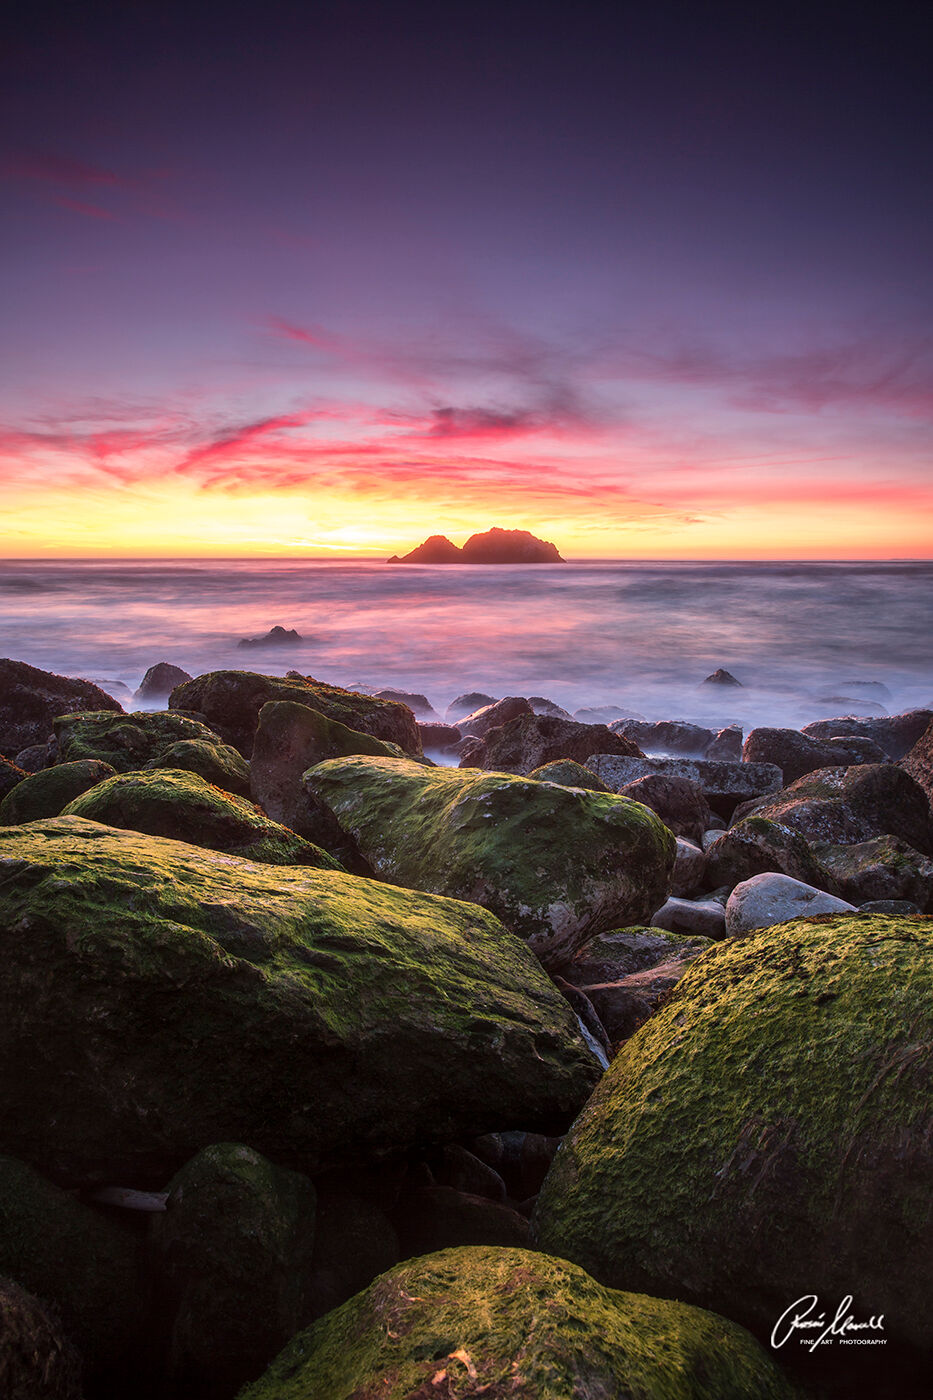 A beautiful sunset at San Francisco's Sutro Bath with moss covered rocks in the foreground.